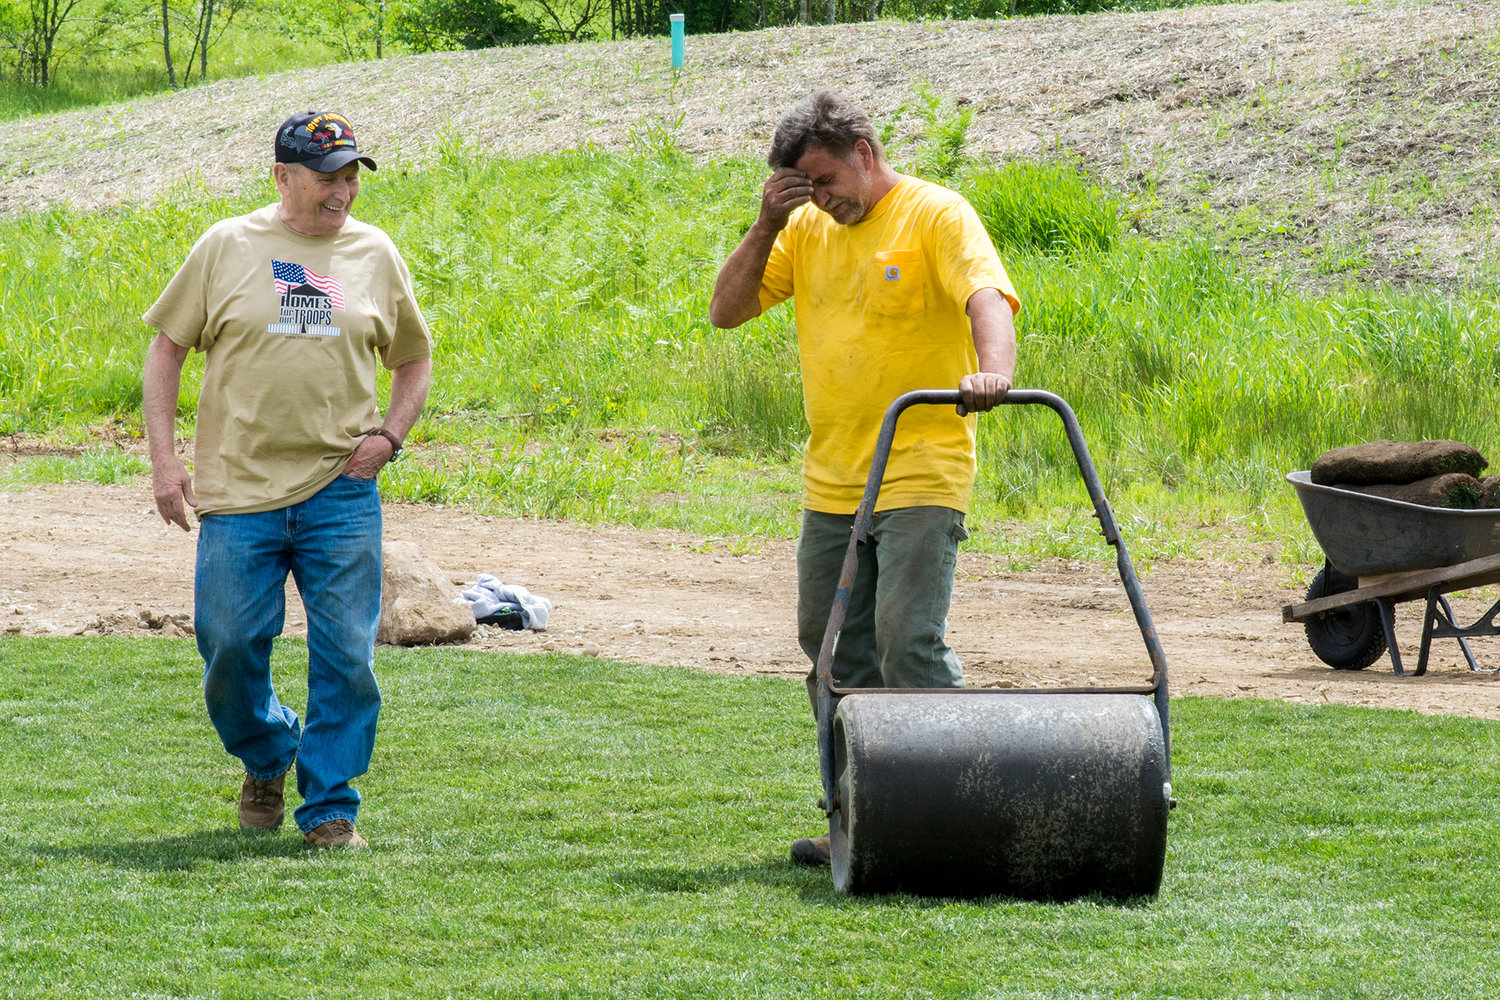 Travis Nichelson, left, chats with a member of the work crew that installed nearly 6,000 square feet of sod Saturday morning at the soon-to-be Tenino home of wounded veteran Jereme Sawyer.